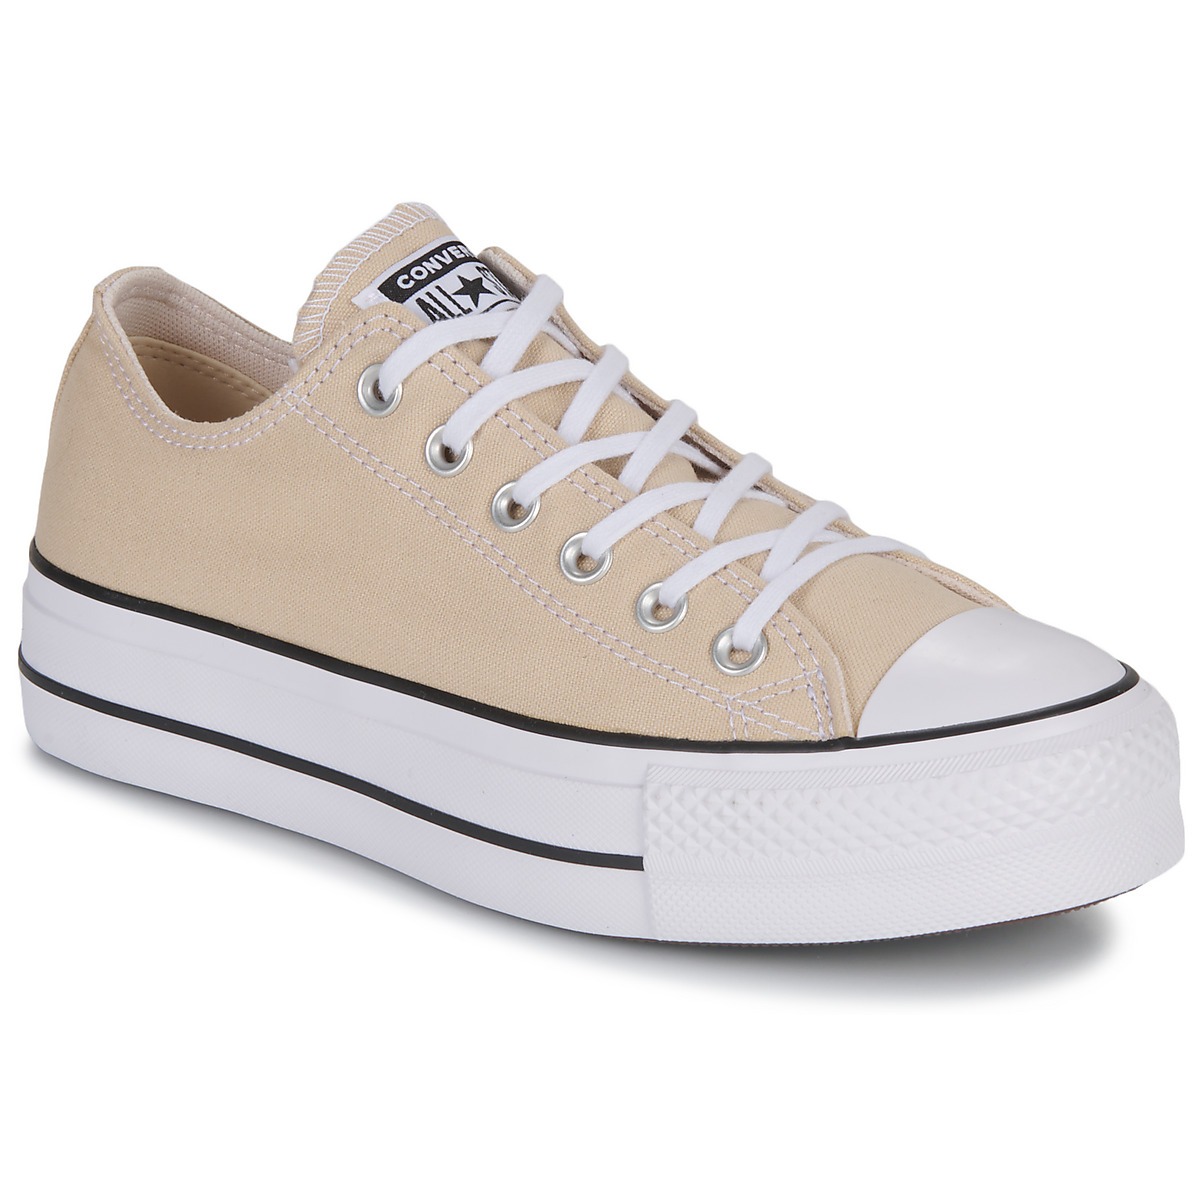 Xαμηλά Sneakers Converse CHUCK TAYLOR ALL STAR LIFT PLATFORM SEASONAL COLOR-OAT MILK/WHIT